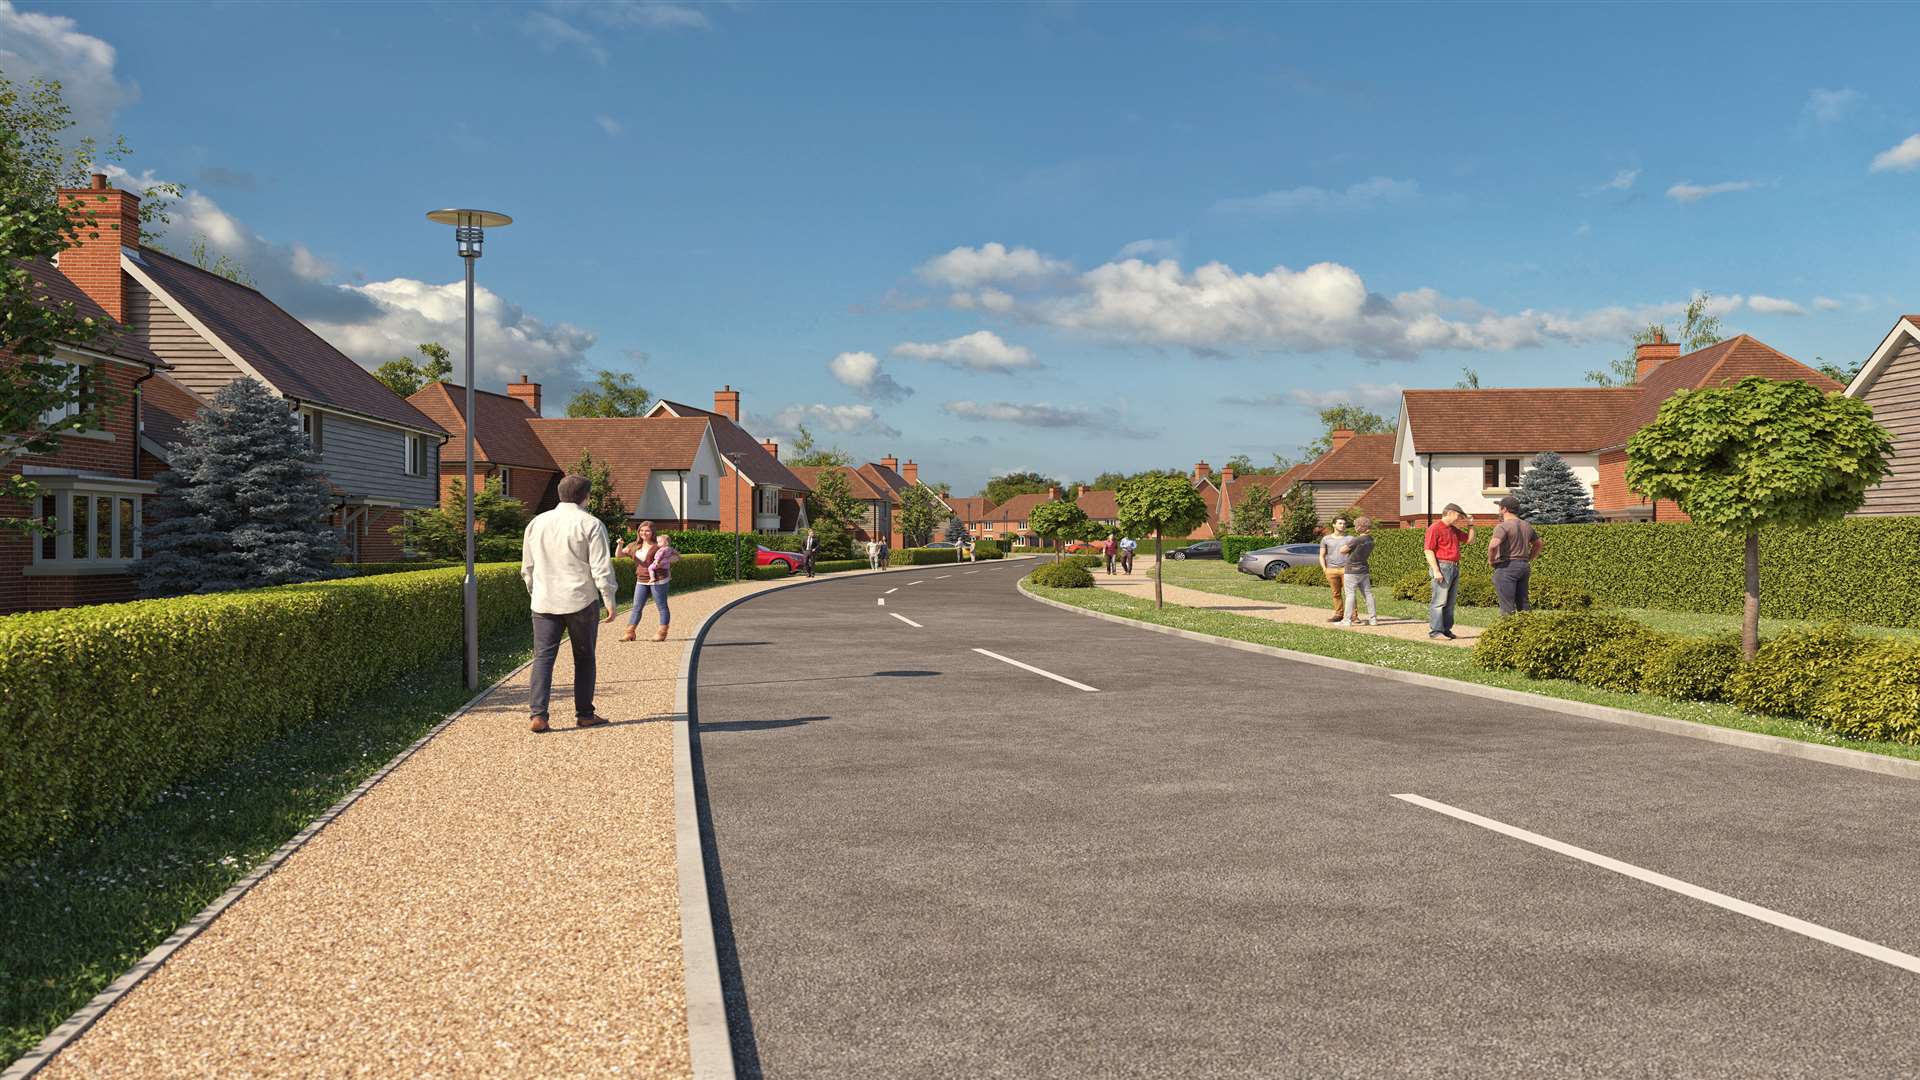 An artist's impression of the proposed development at Wises Lane